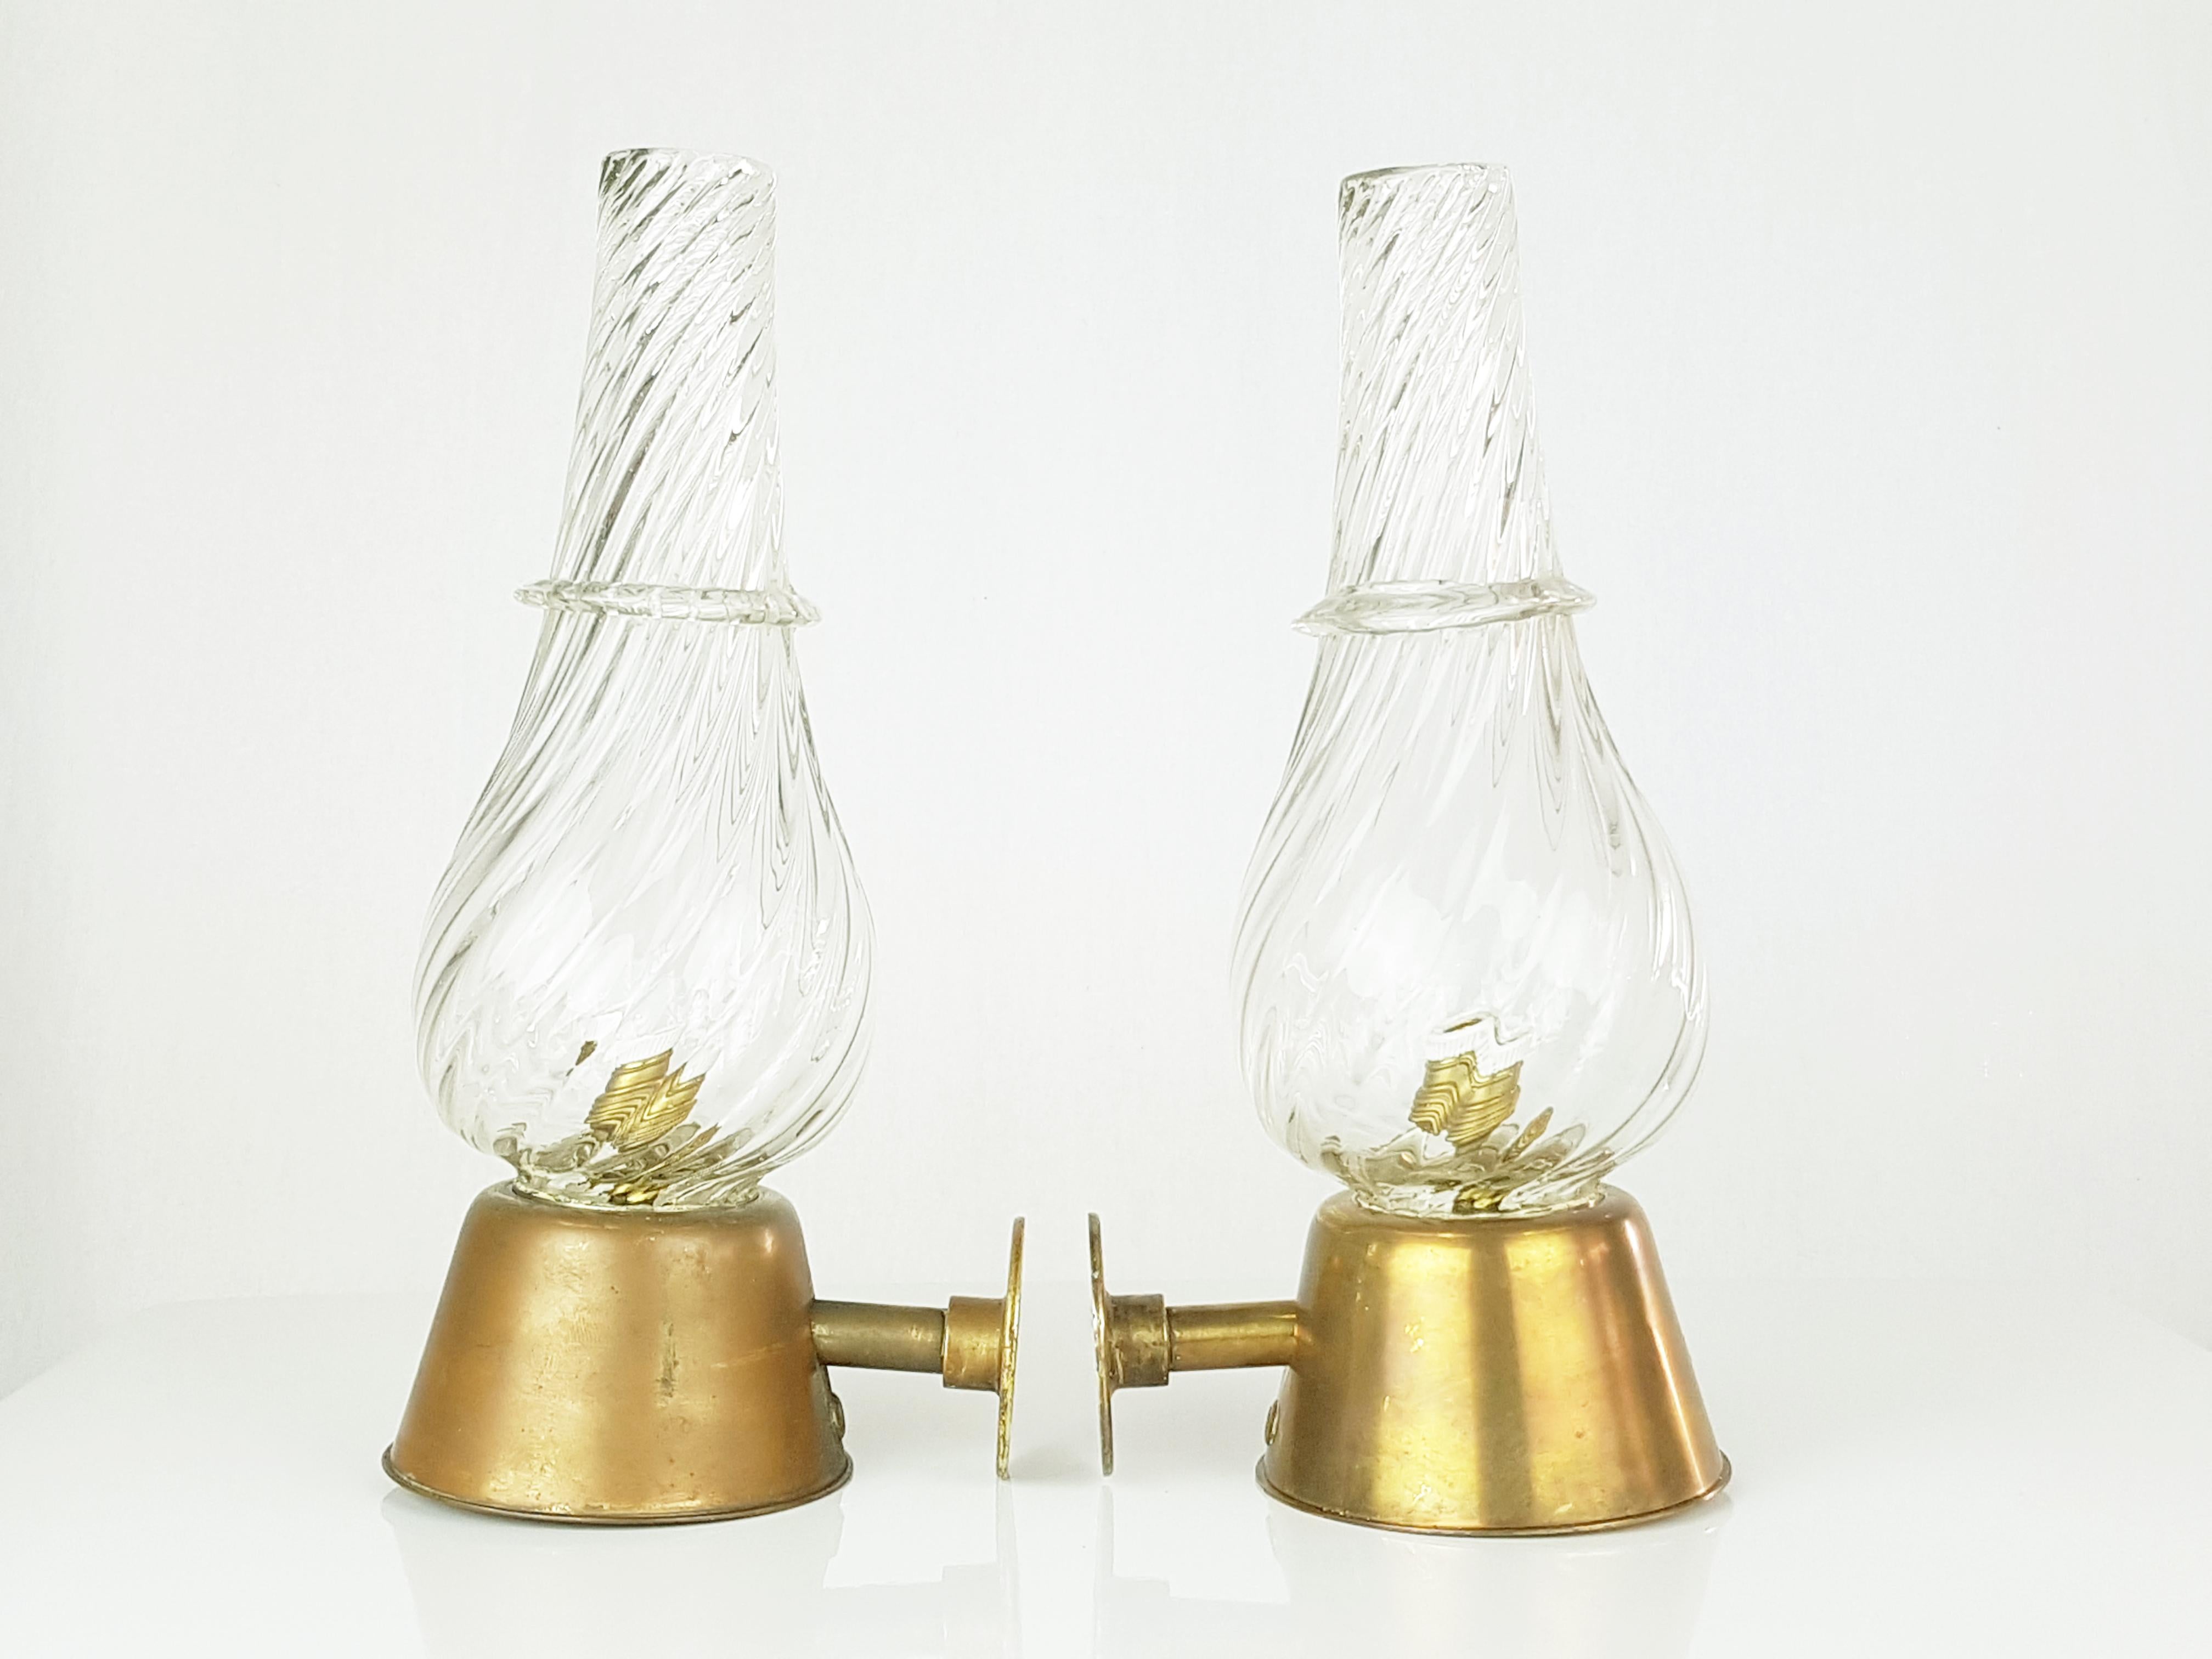 Rare pair of clear murano glass & brass sconces manufactured by Seguso around the 1950. Good vintage condition: one brass structure was polished and remains less oxidated than the other one.